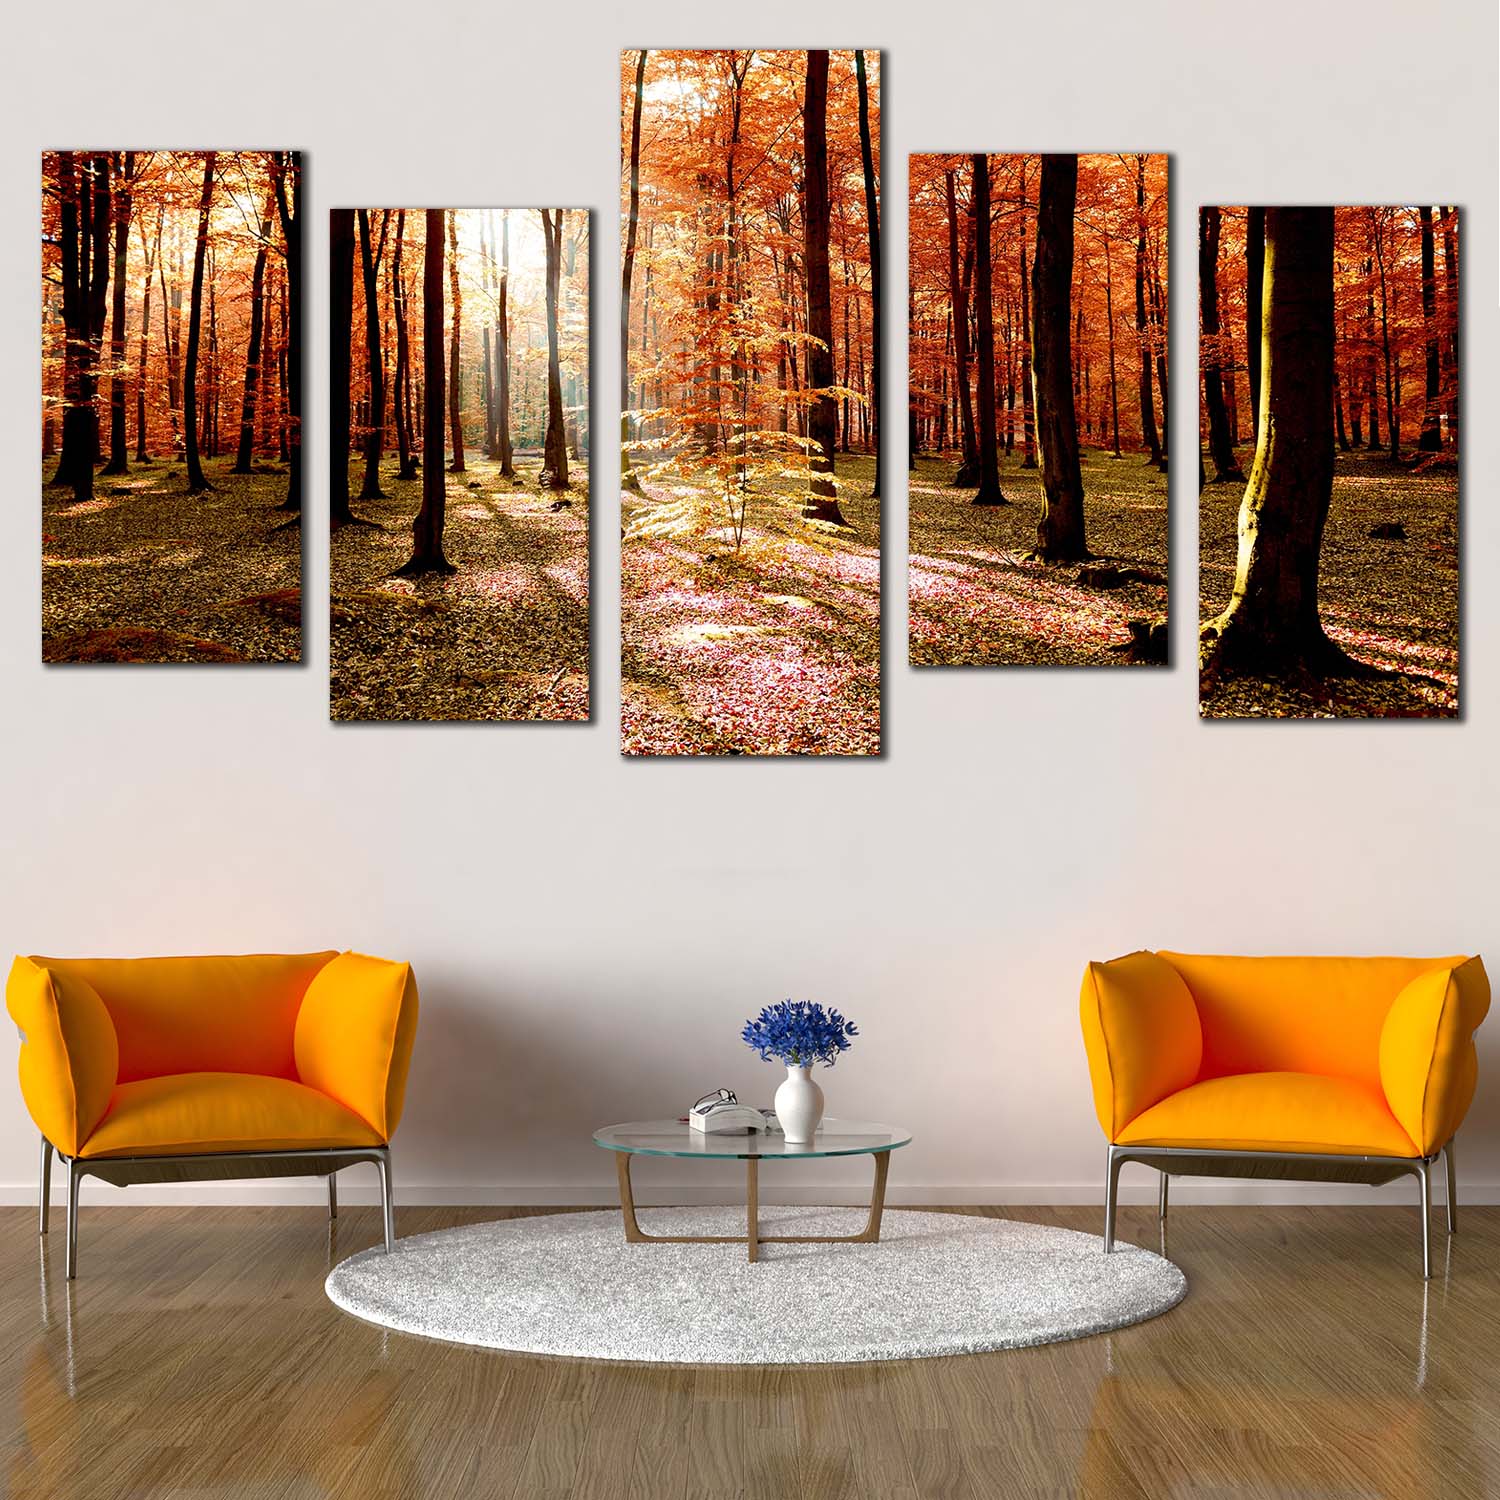 Nature Scenery Canvas Wall Art, Green Fields Autumn Forest 5 Piece Mul ...